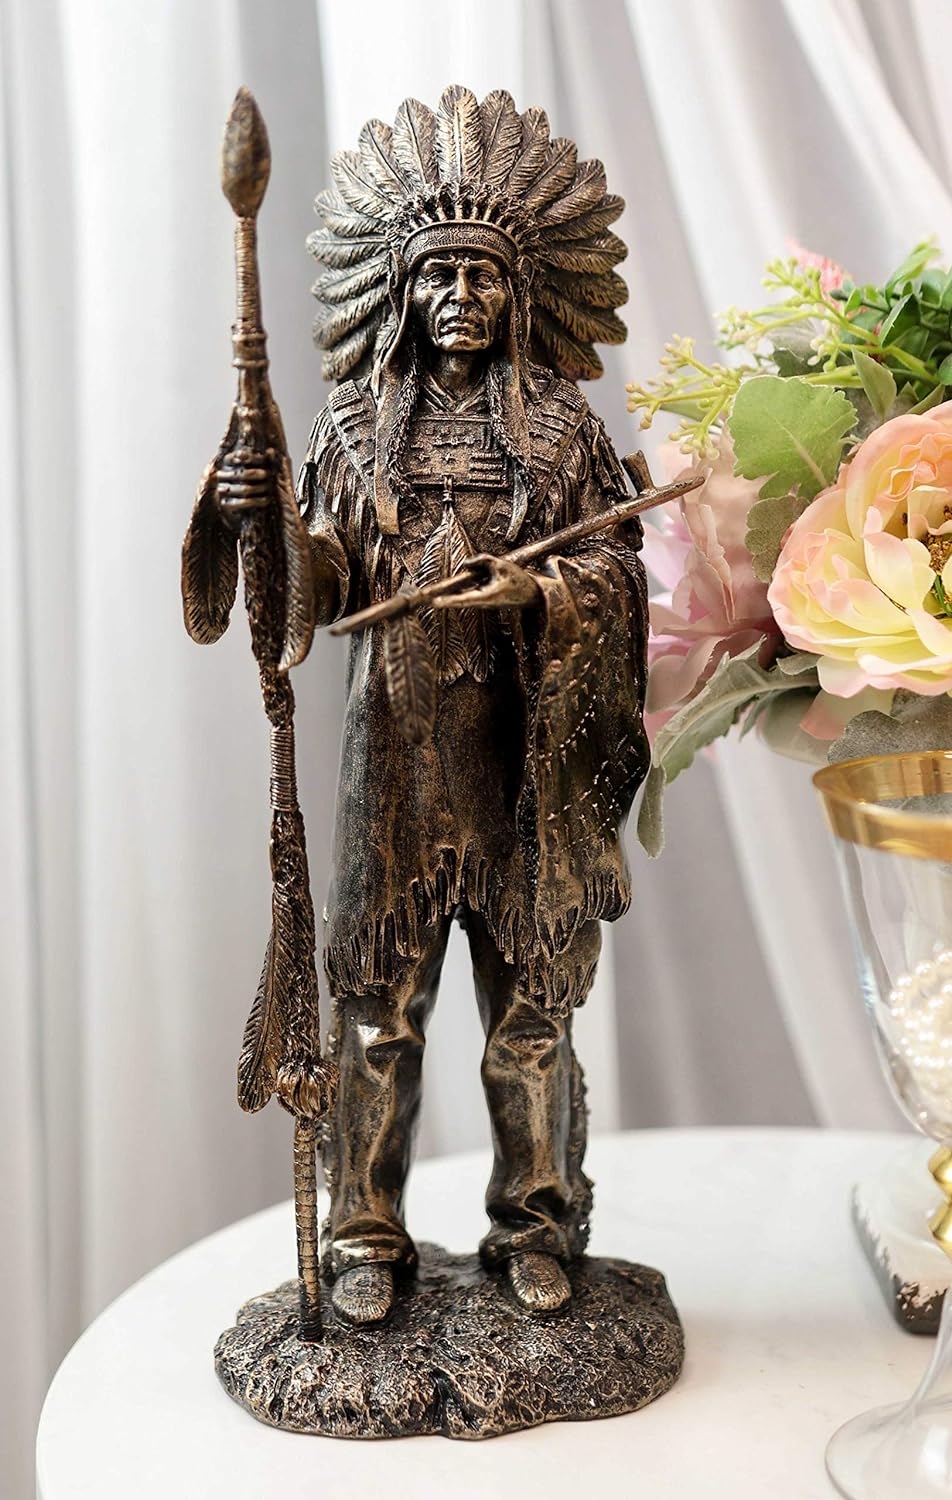 Ebros Native American Indian Warrior Tribal Chief with Battle Headdress Holding Spear and Chalumet Pipe Statue As Home Decor Sculpture Cultural Heritage History Figurine